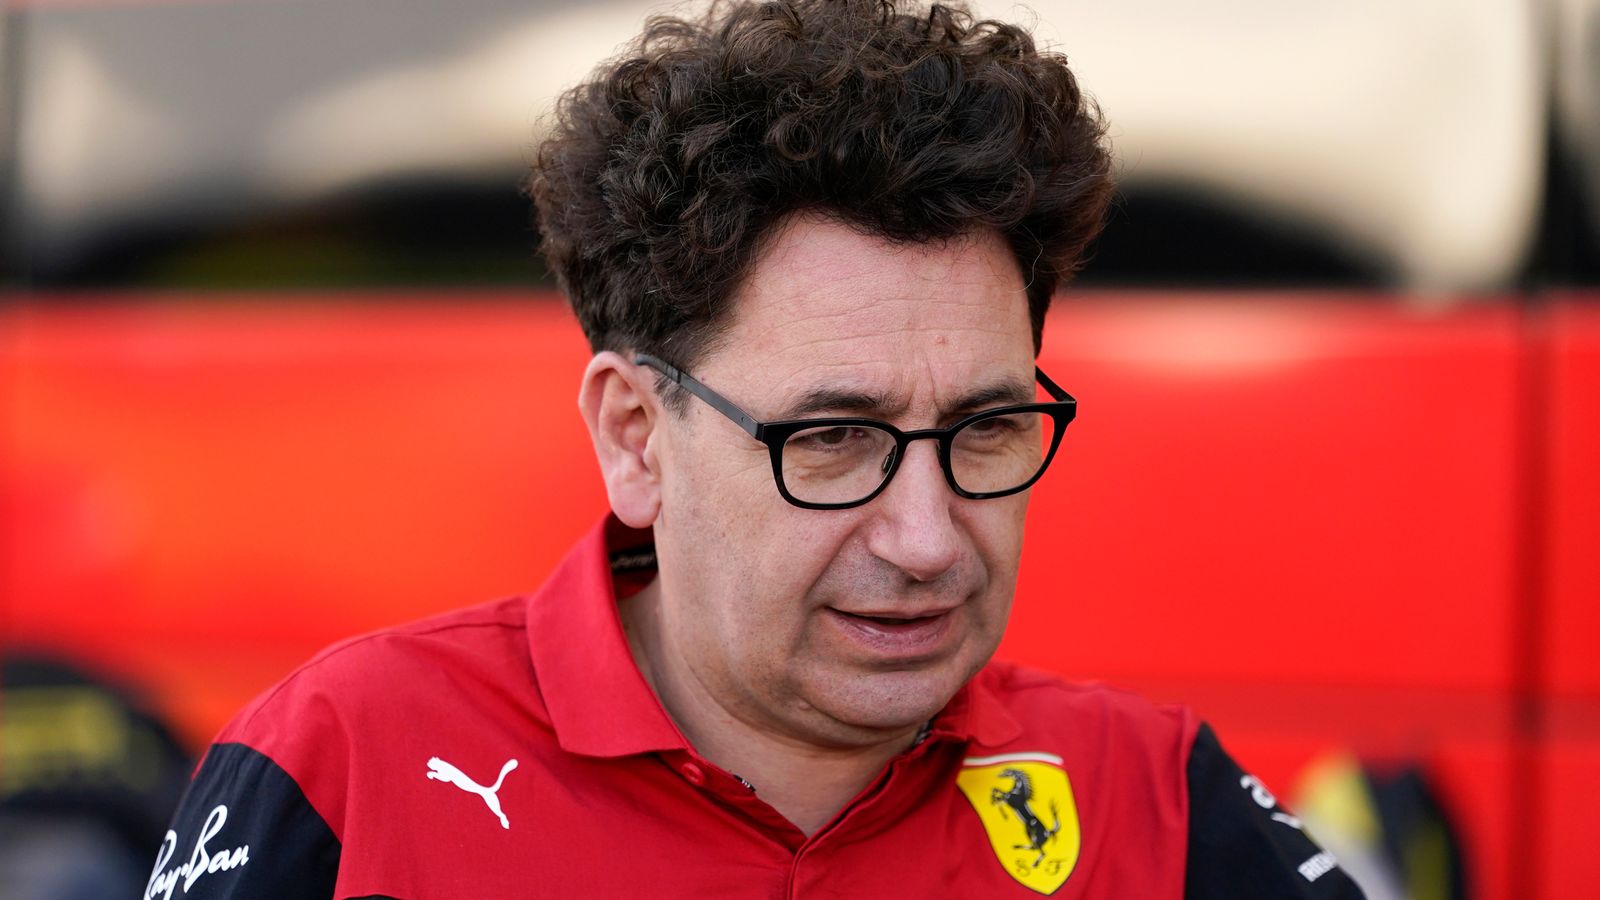 Mattia Binotto: Ferrari deny reports team principal will be sacked and replaced by Fred Vasseur